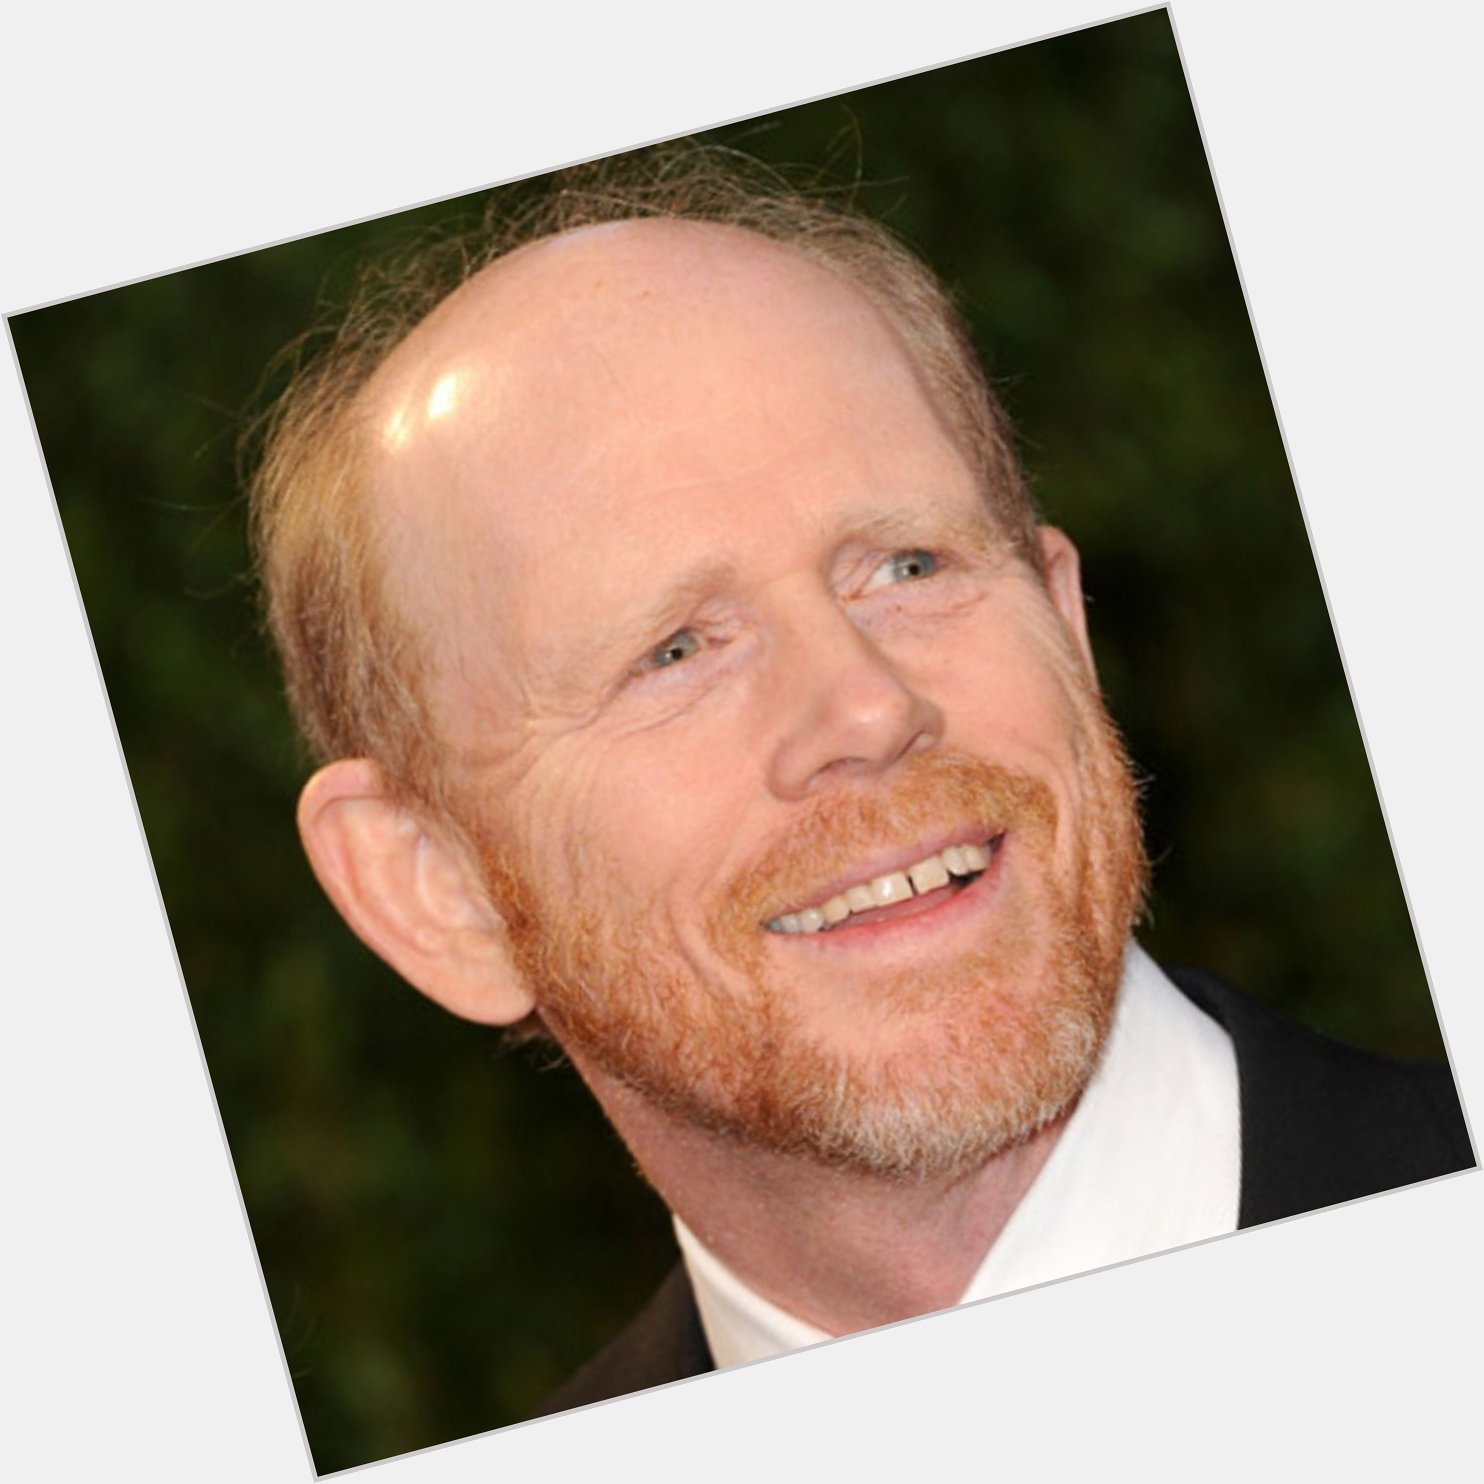 Avery Happy 64th (hard to believe) Birthday to actor/director Ron Howard.  